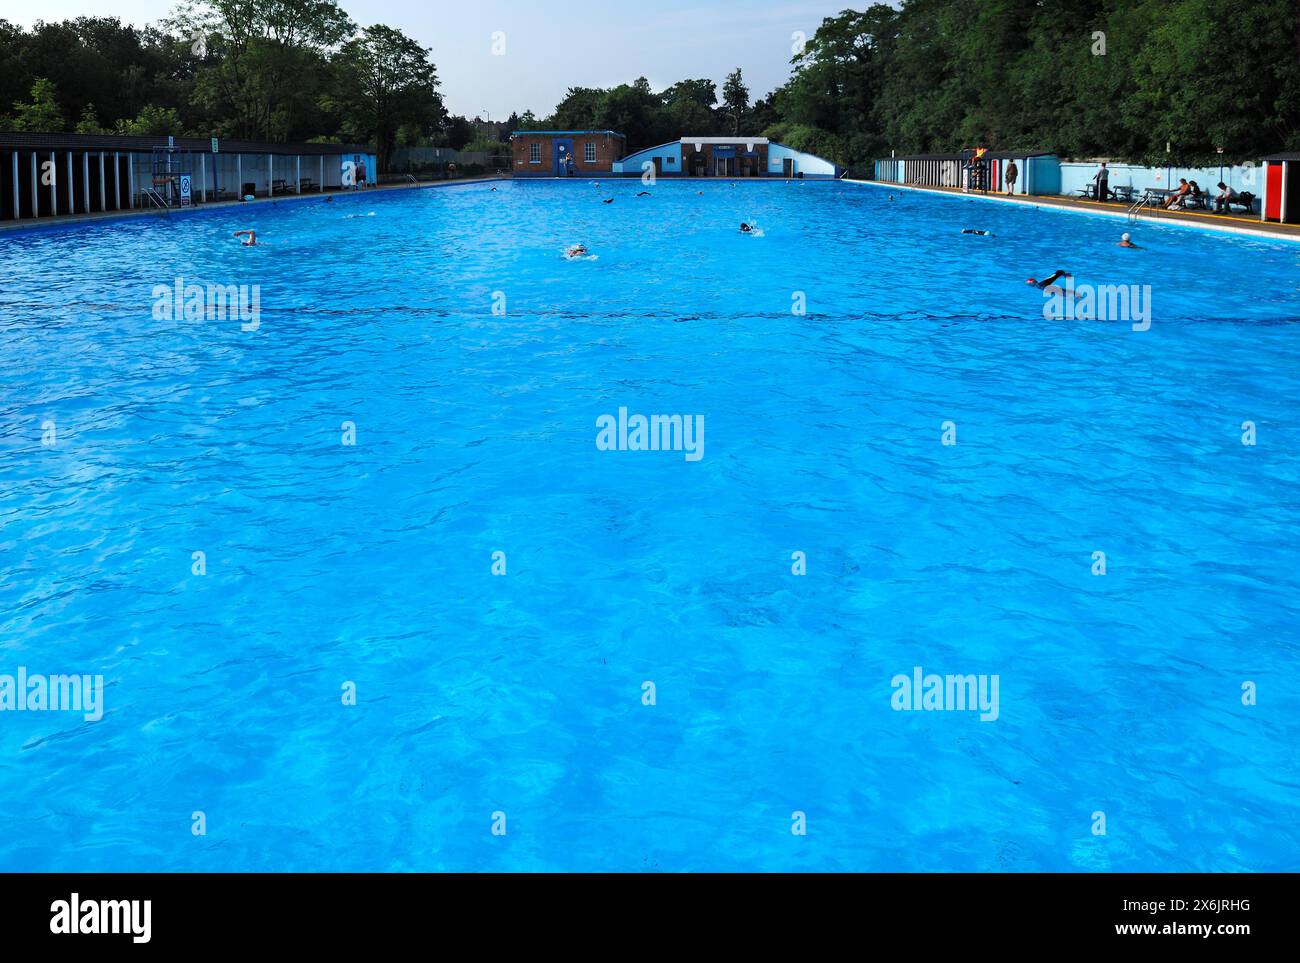 Large outdoor pool Tooting Bec Lido (91 m x 30 m), Tooting Bec Common, Tooting Bec, London, England, United Kingdom Stock Photo